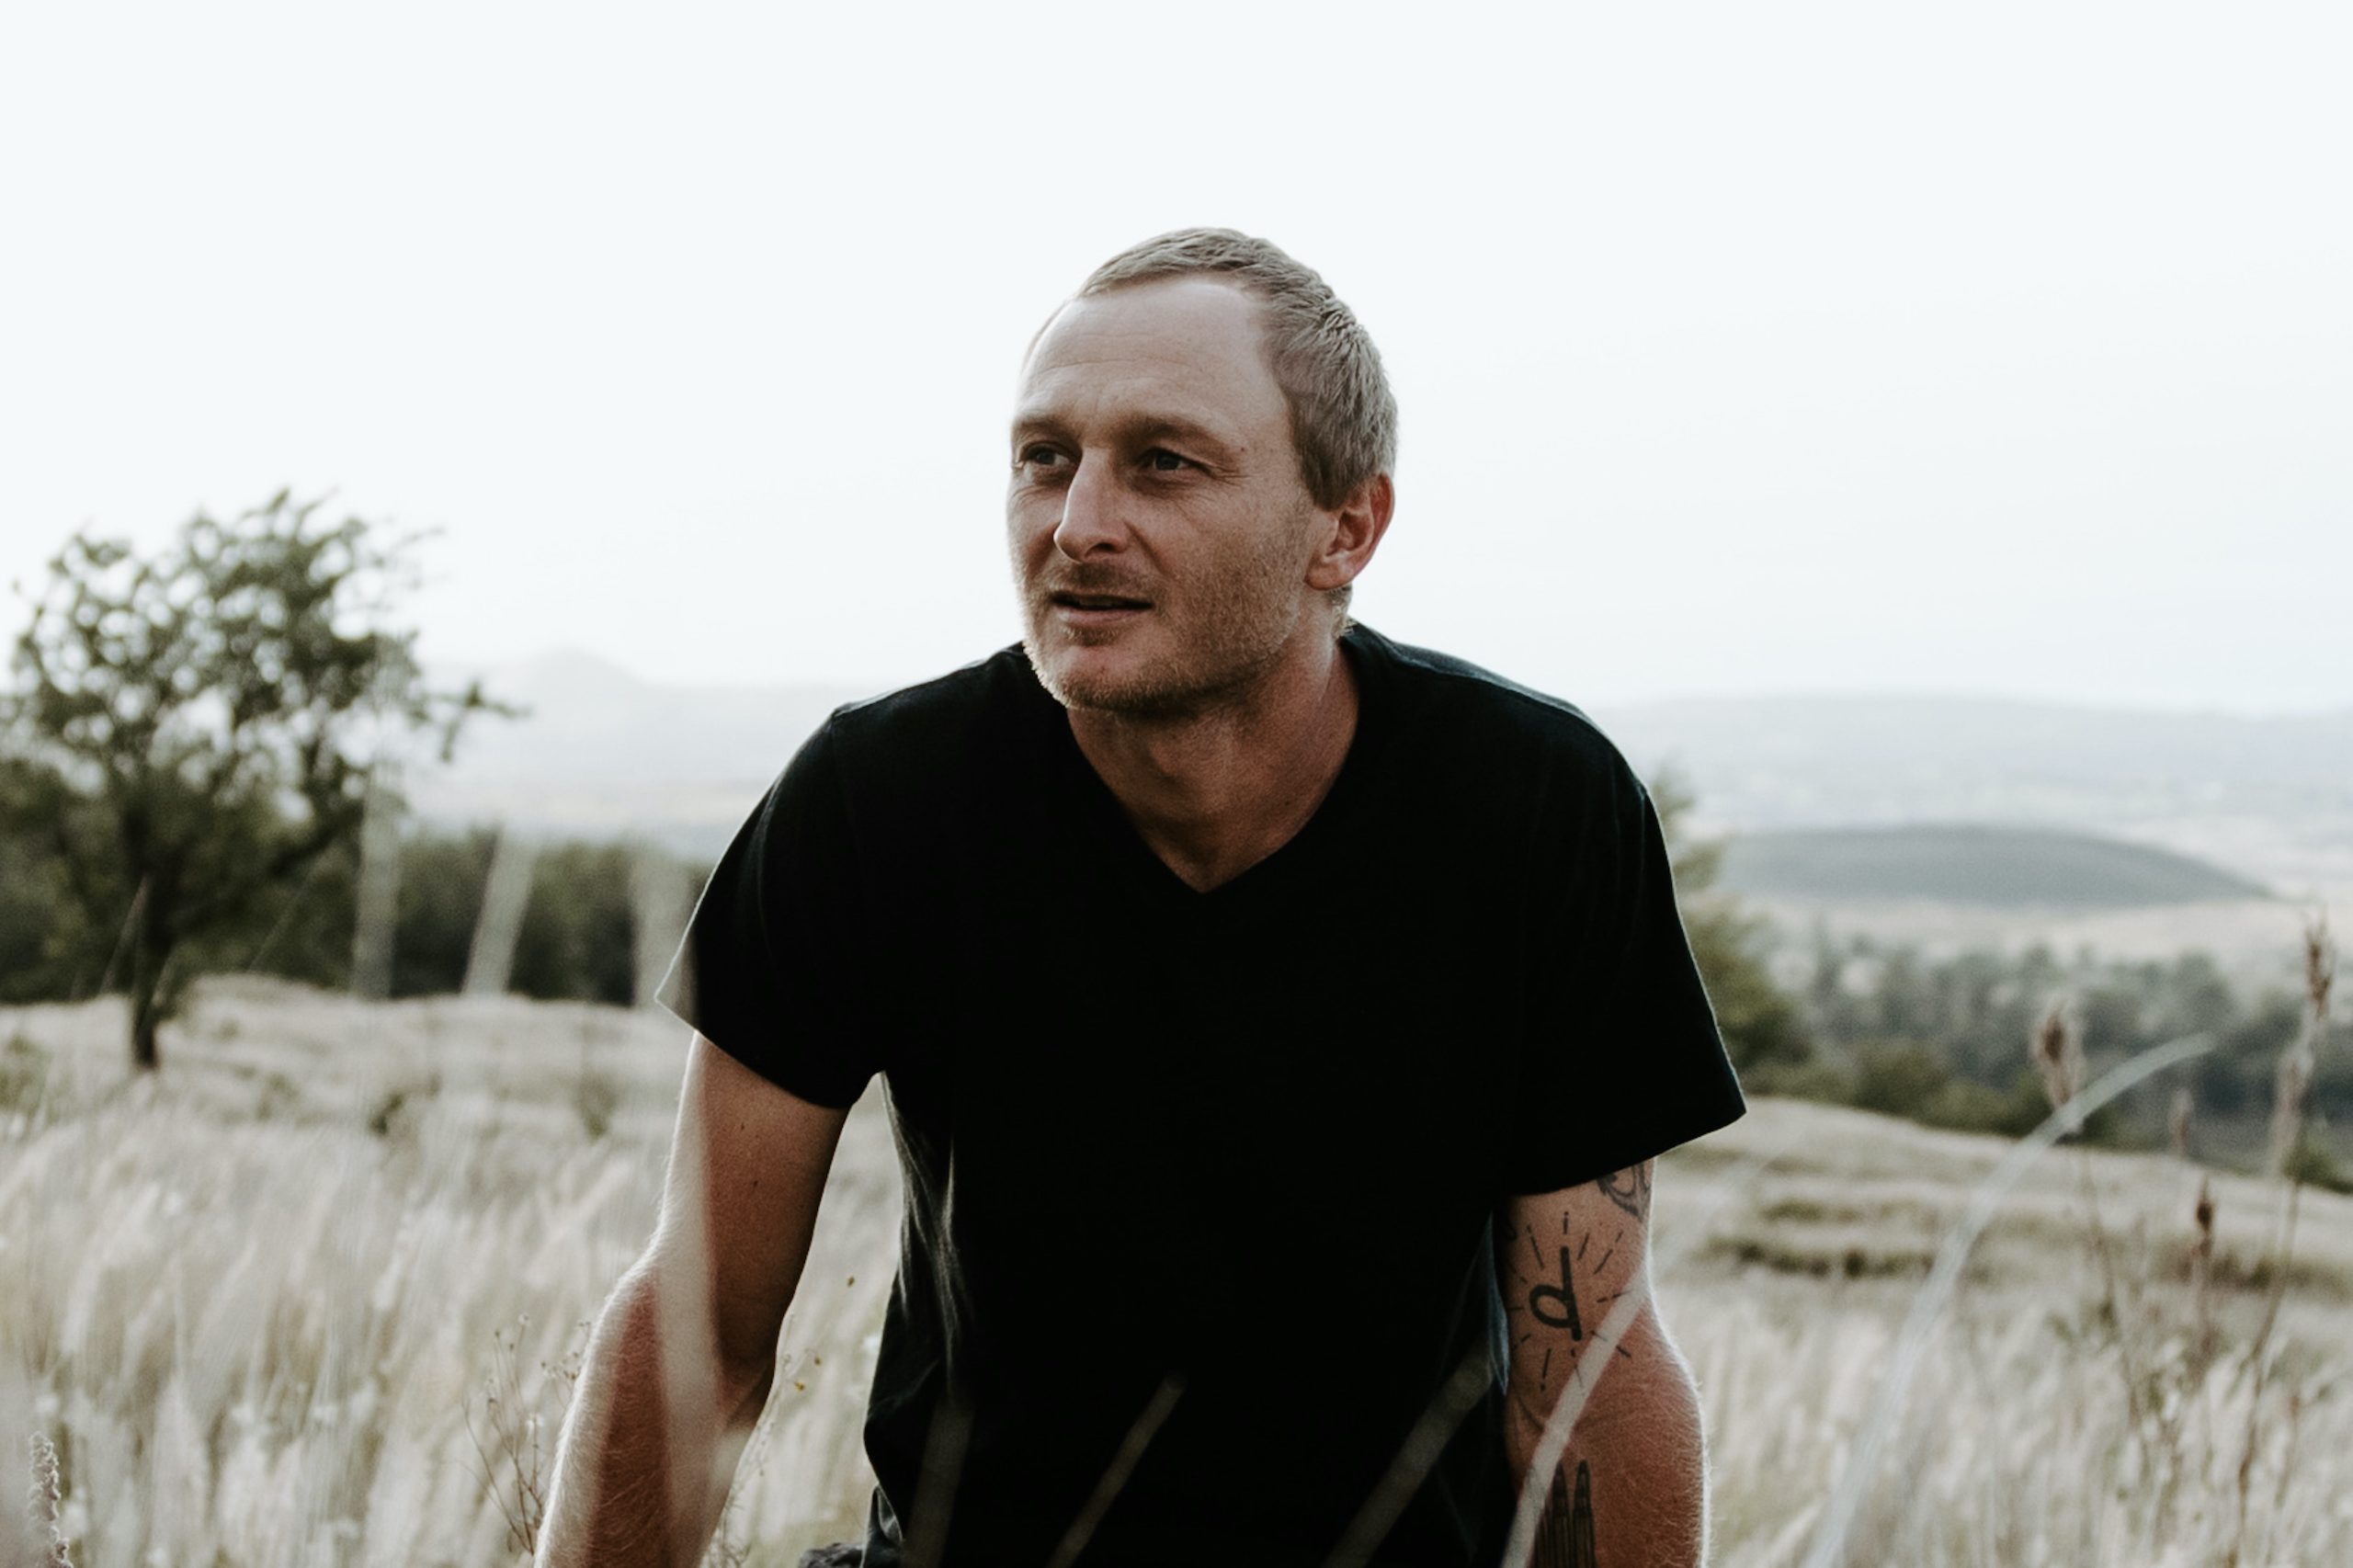 South African born, Hawaii based singer songwriter Luke Beling releases Inspirational African single MZANSI AFRIKA inspired by classic sounds of Johnny Clegg and Paul Simon